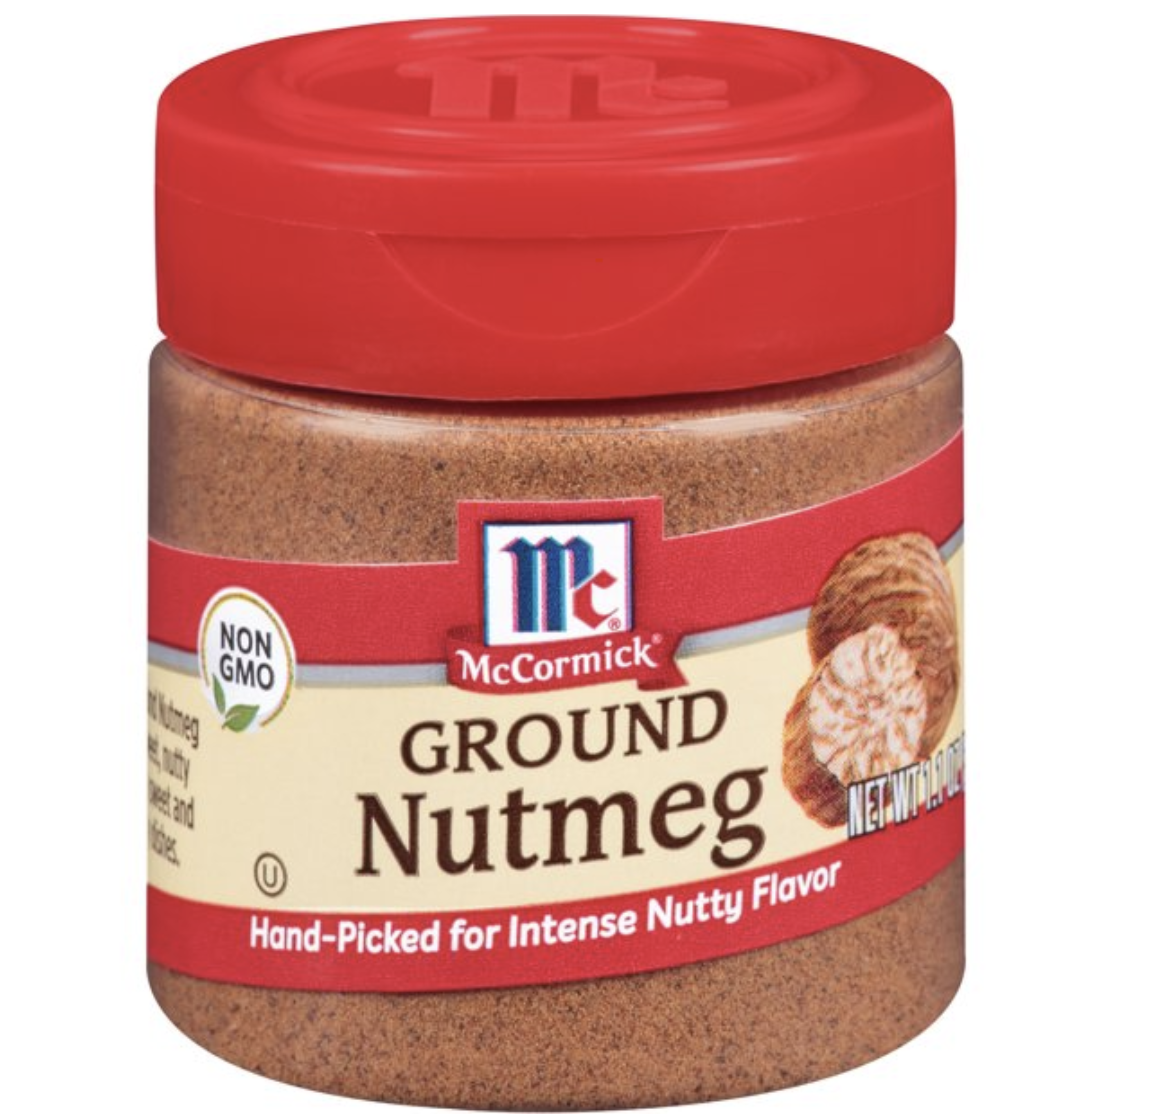 Container of ground nutmeg